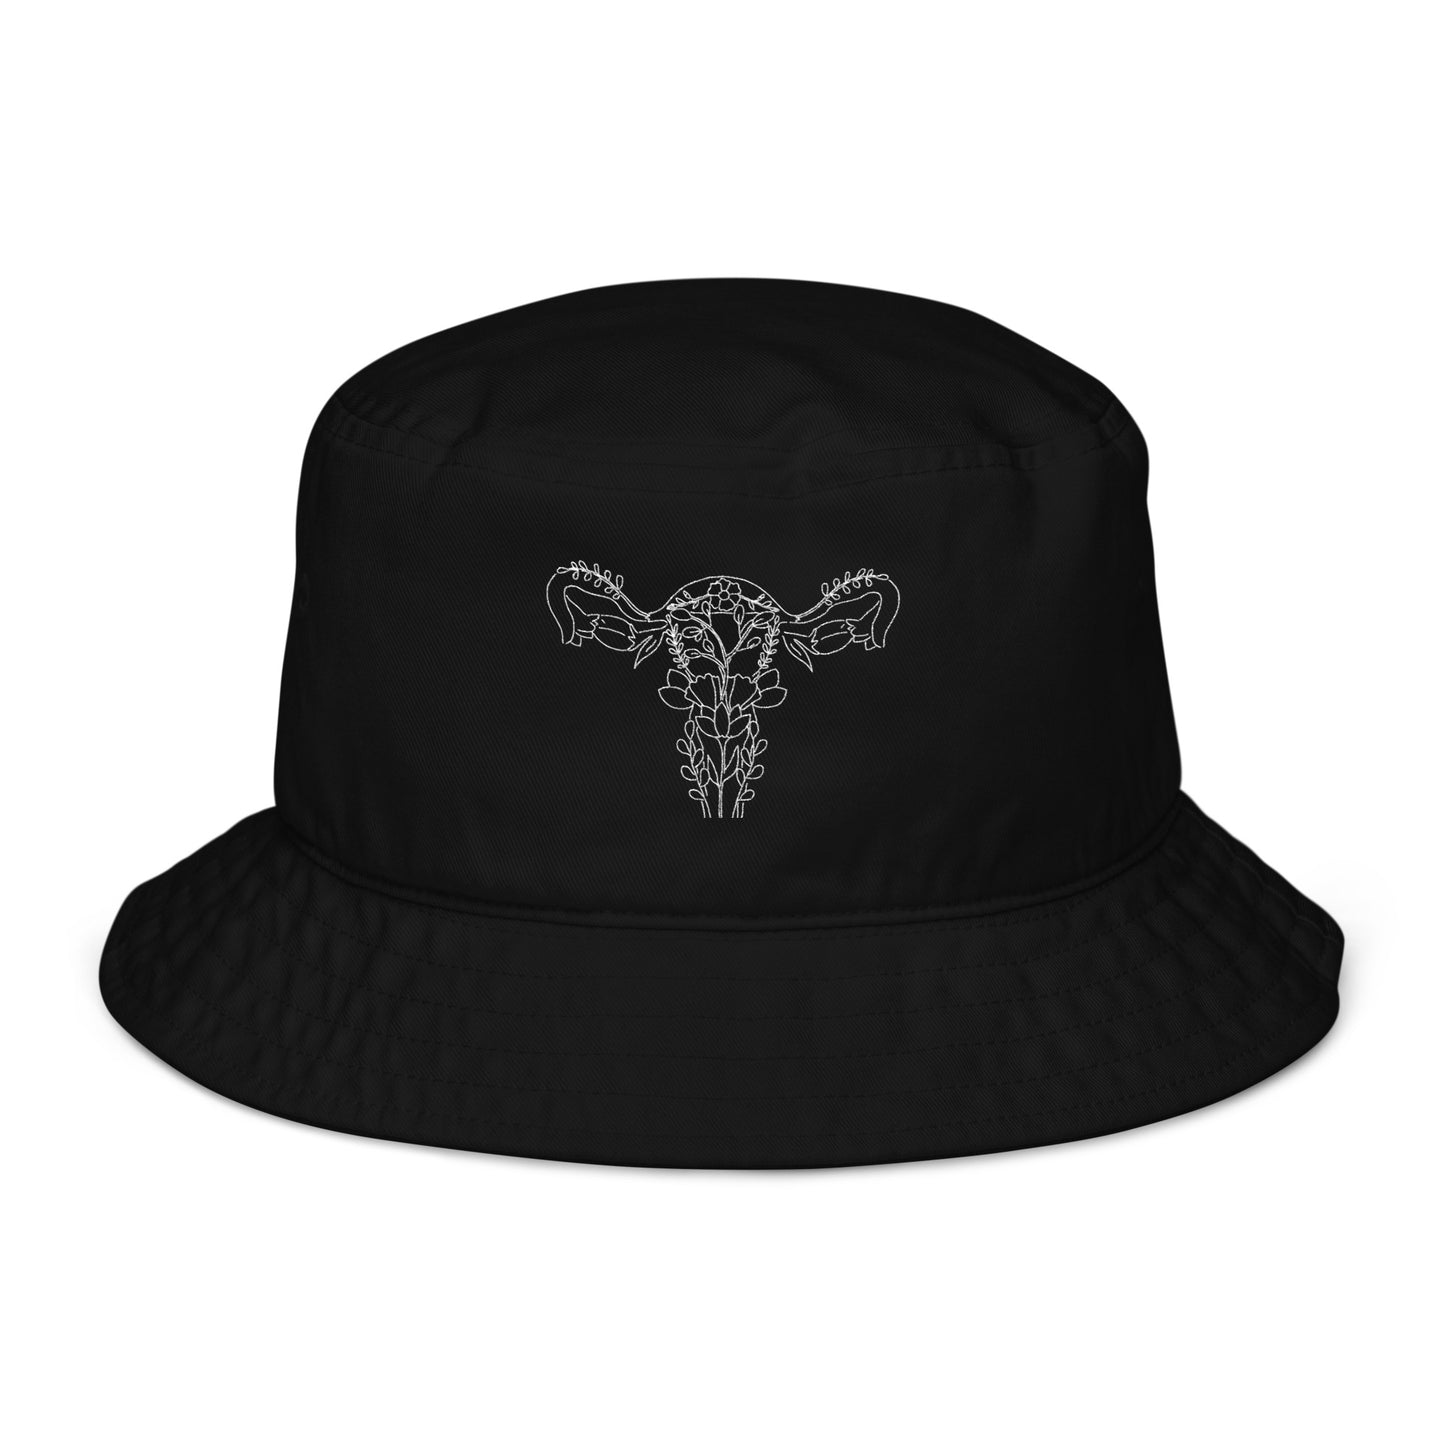 Reproductive Rights Bucket Hat